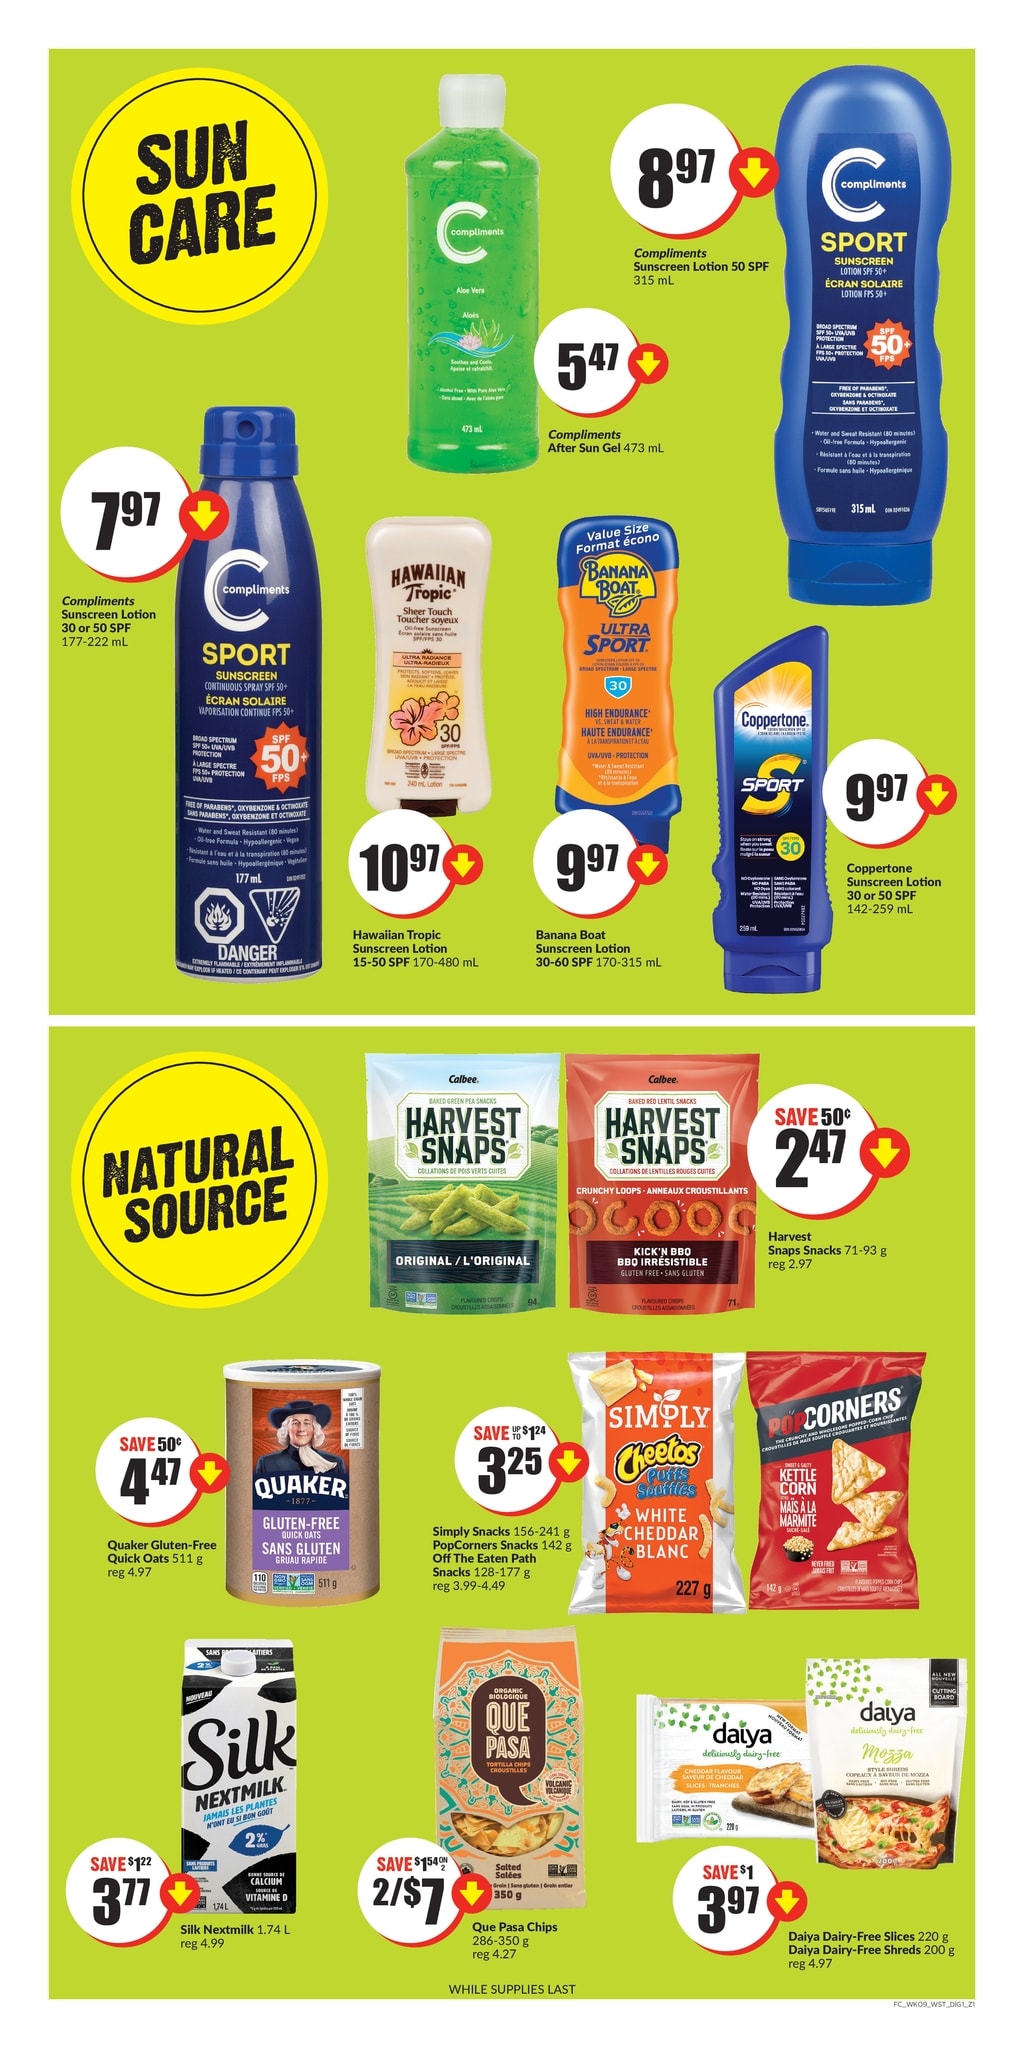 FreshCo British Columbia - Weekly Flyer Specials - Page 5